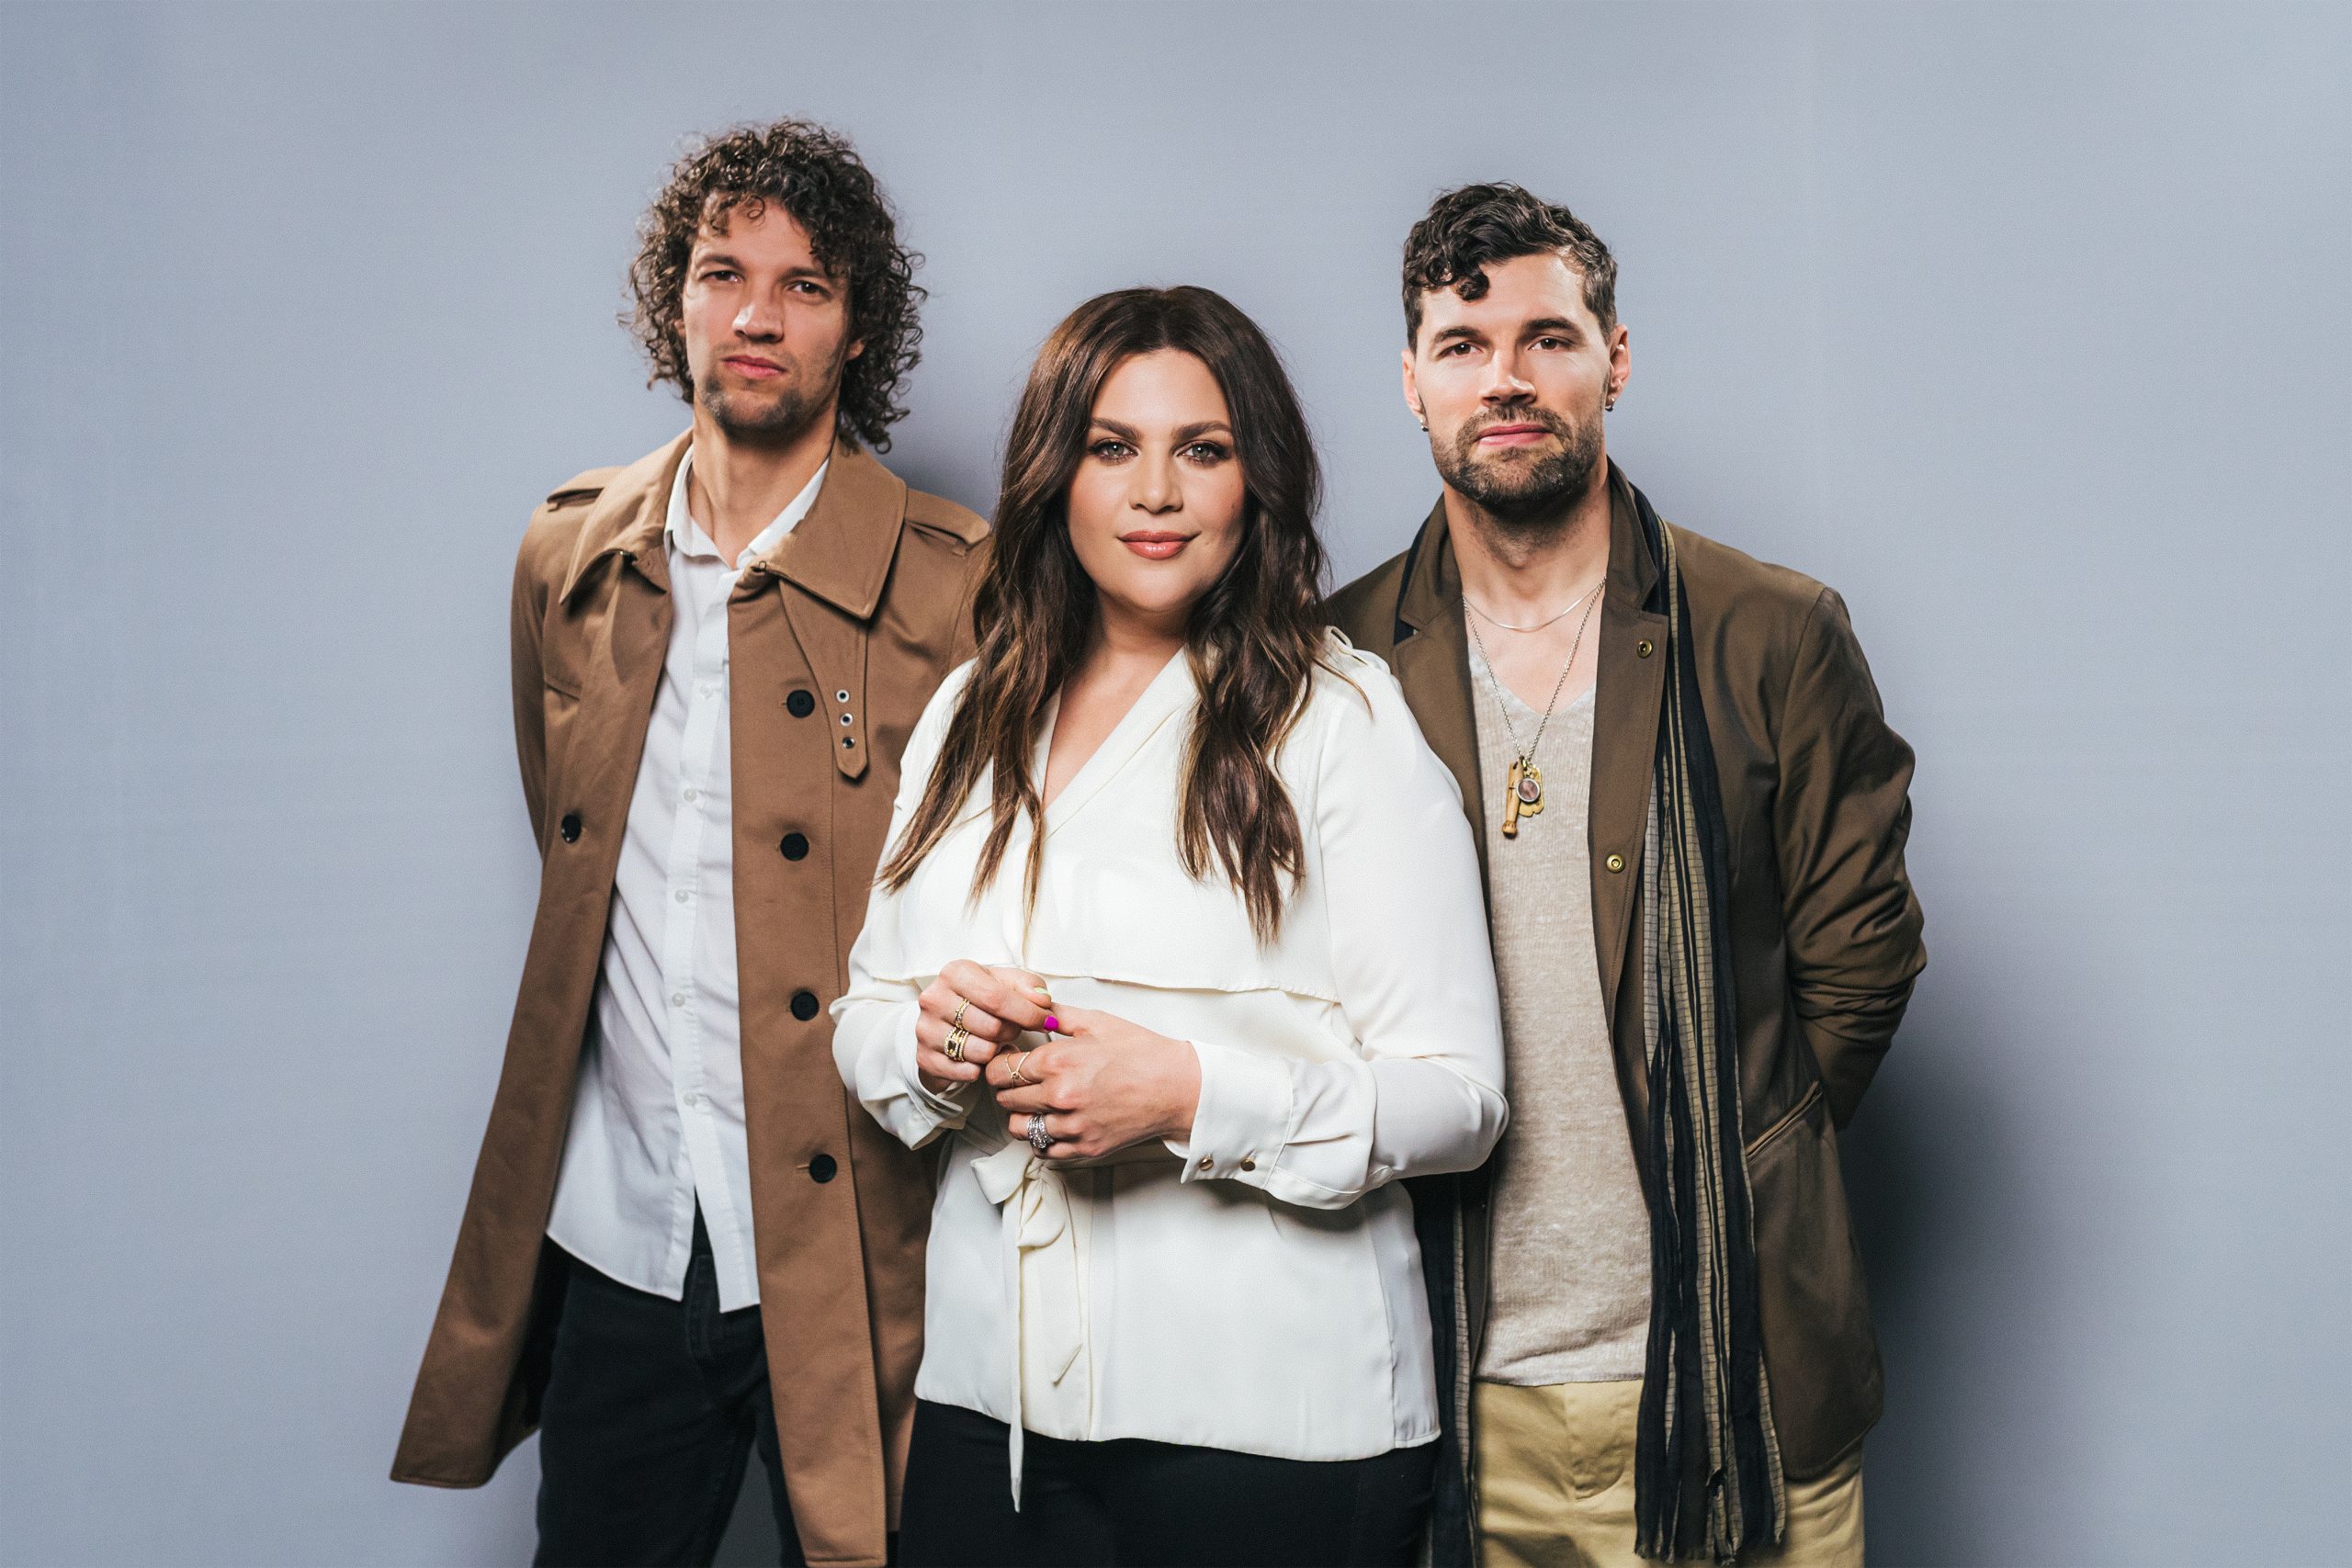 FOR KING + COUNTRY AND HILLARY SCOTT OF LADY A DROP NEW VERSION OF